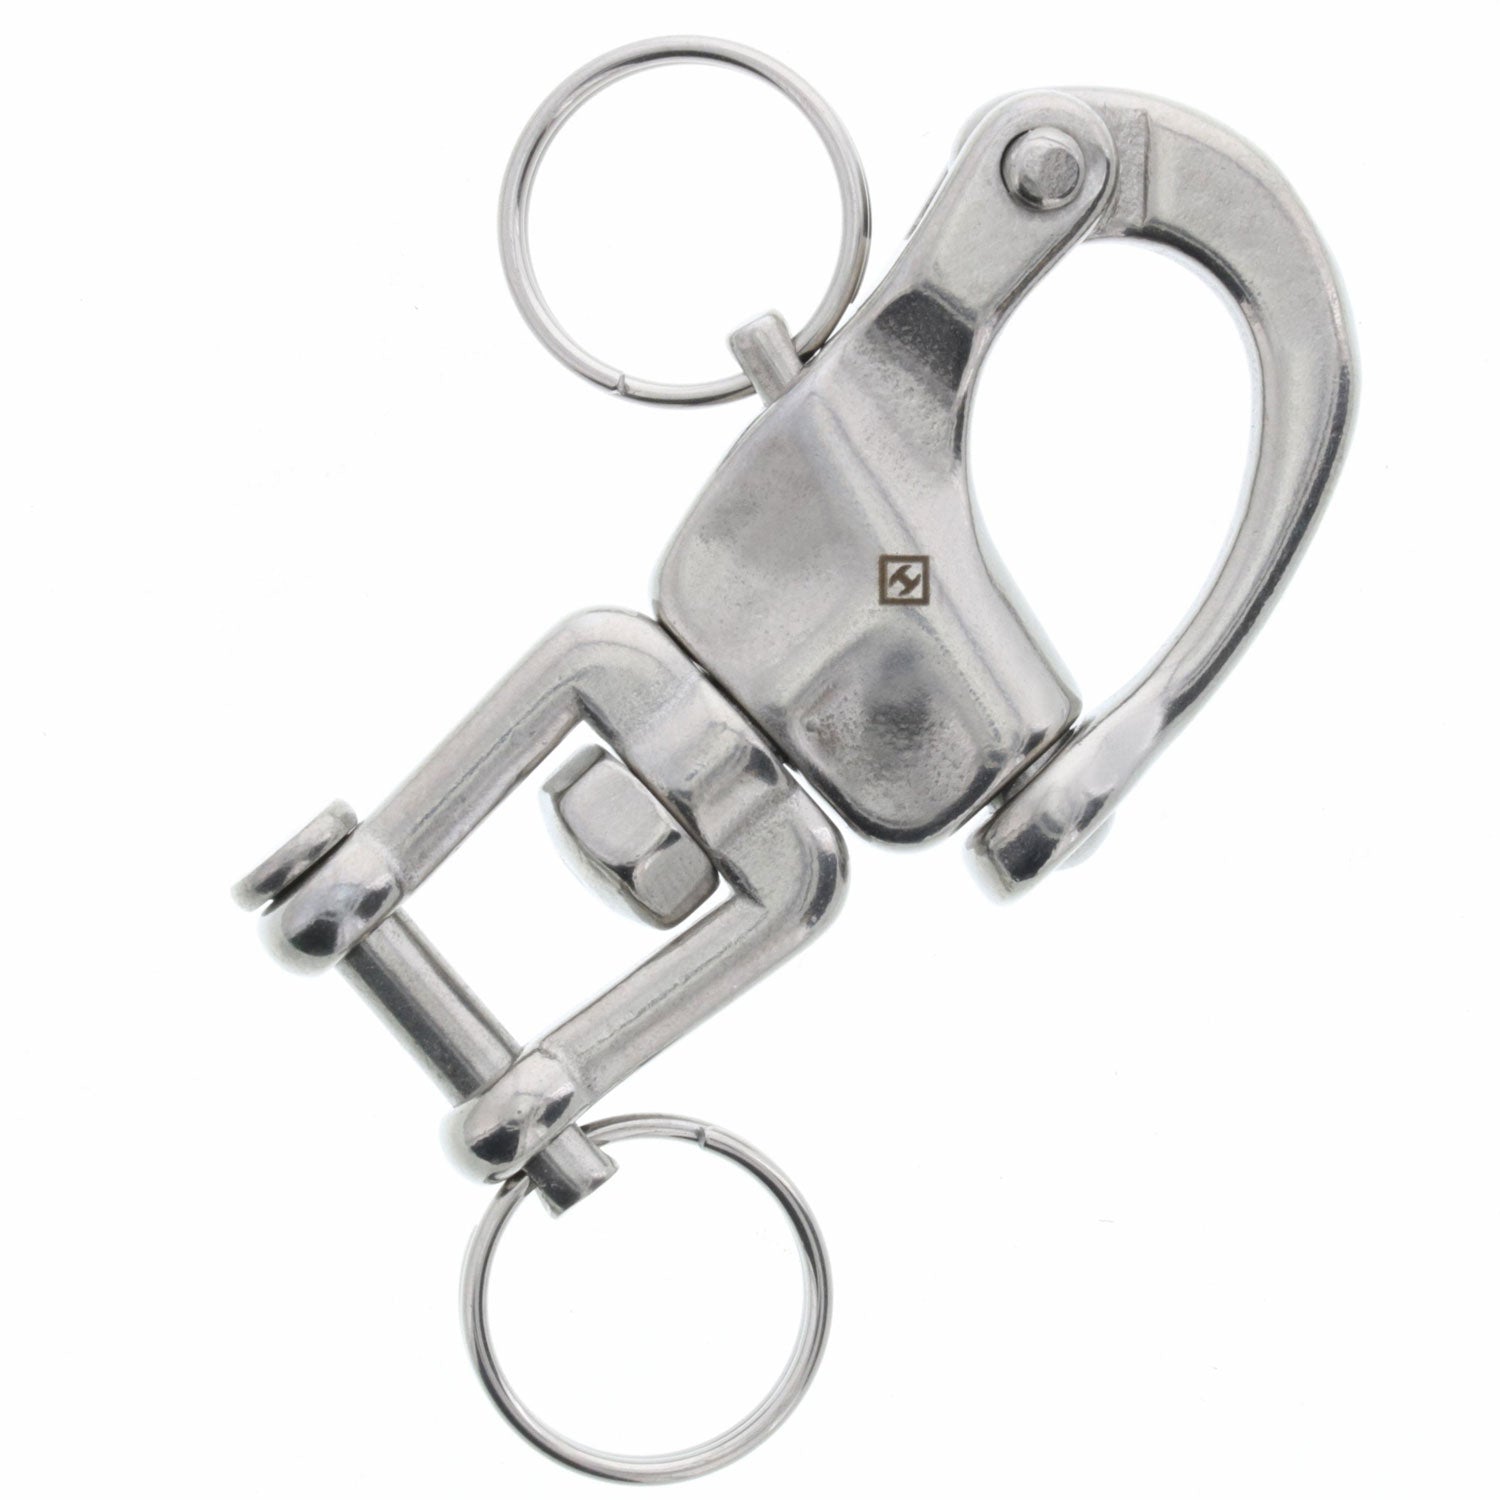 70mm Stainless Steel Jaw Swivel Snap Shackle